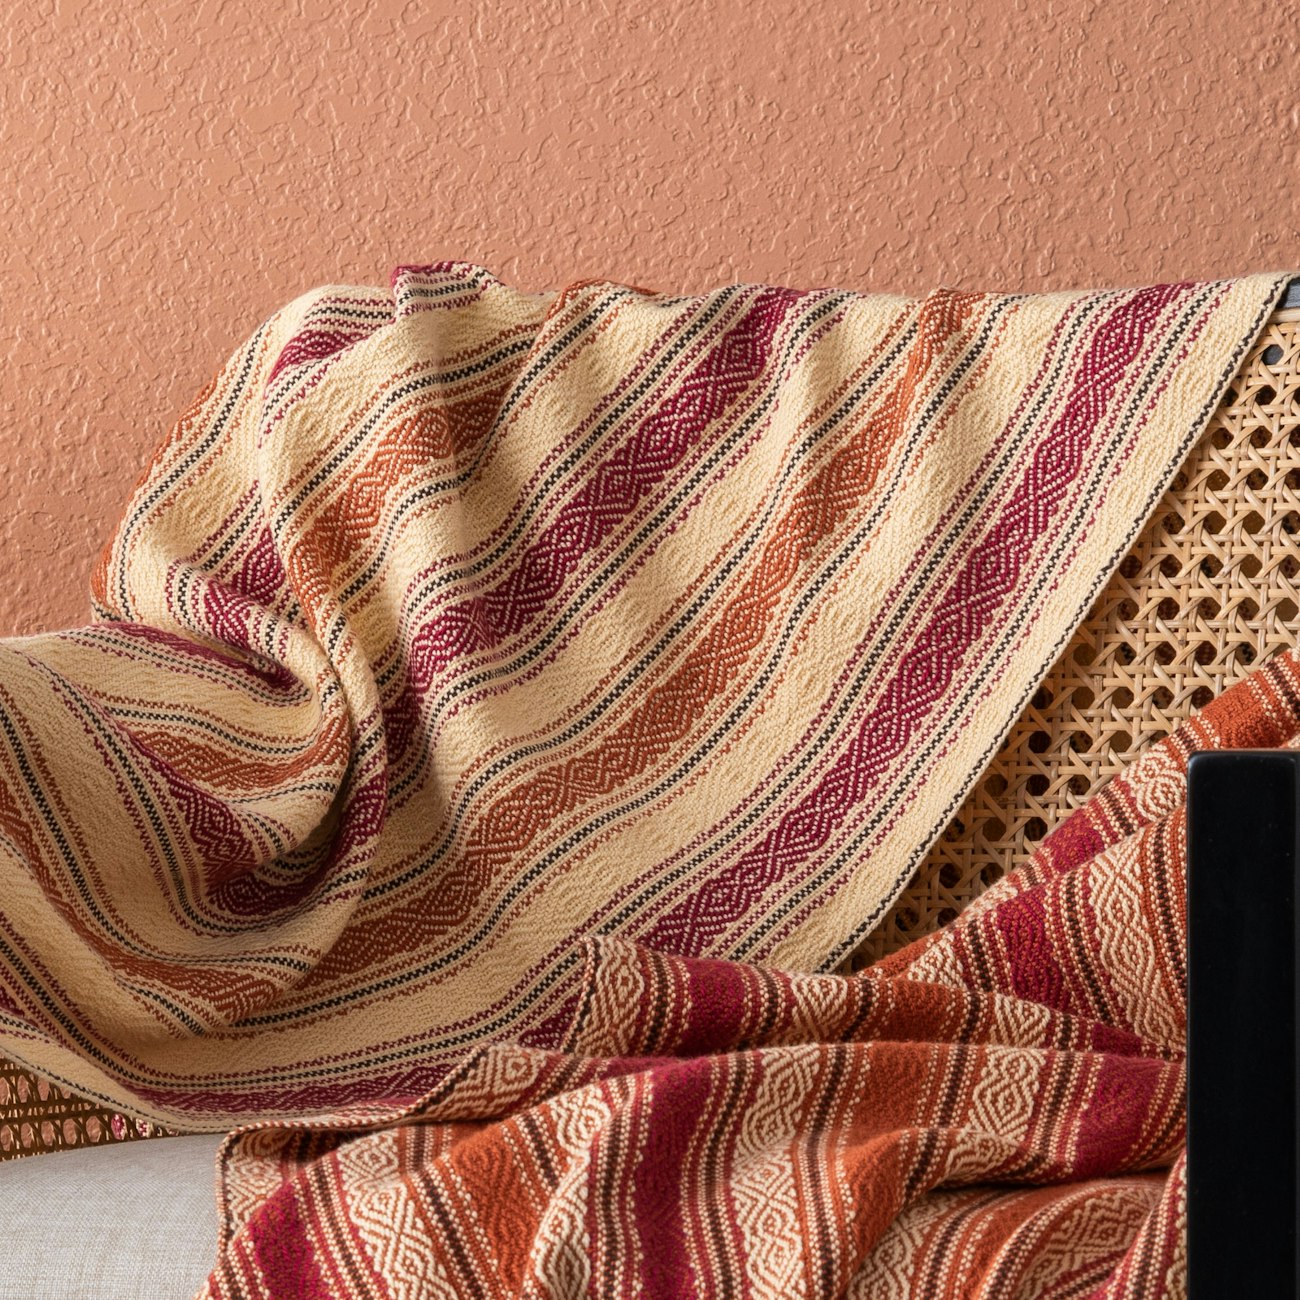 The twill in these Candy Stripe Blankets by Malynda Allen is reminiscent of twisting candy stripes, and the perfect place for a rich magenta to shine. From Handwoven May/June 2022. Photo by Matt Graves